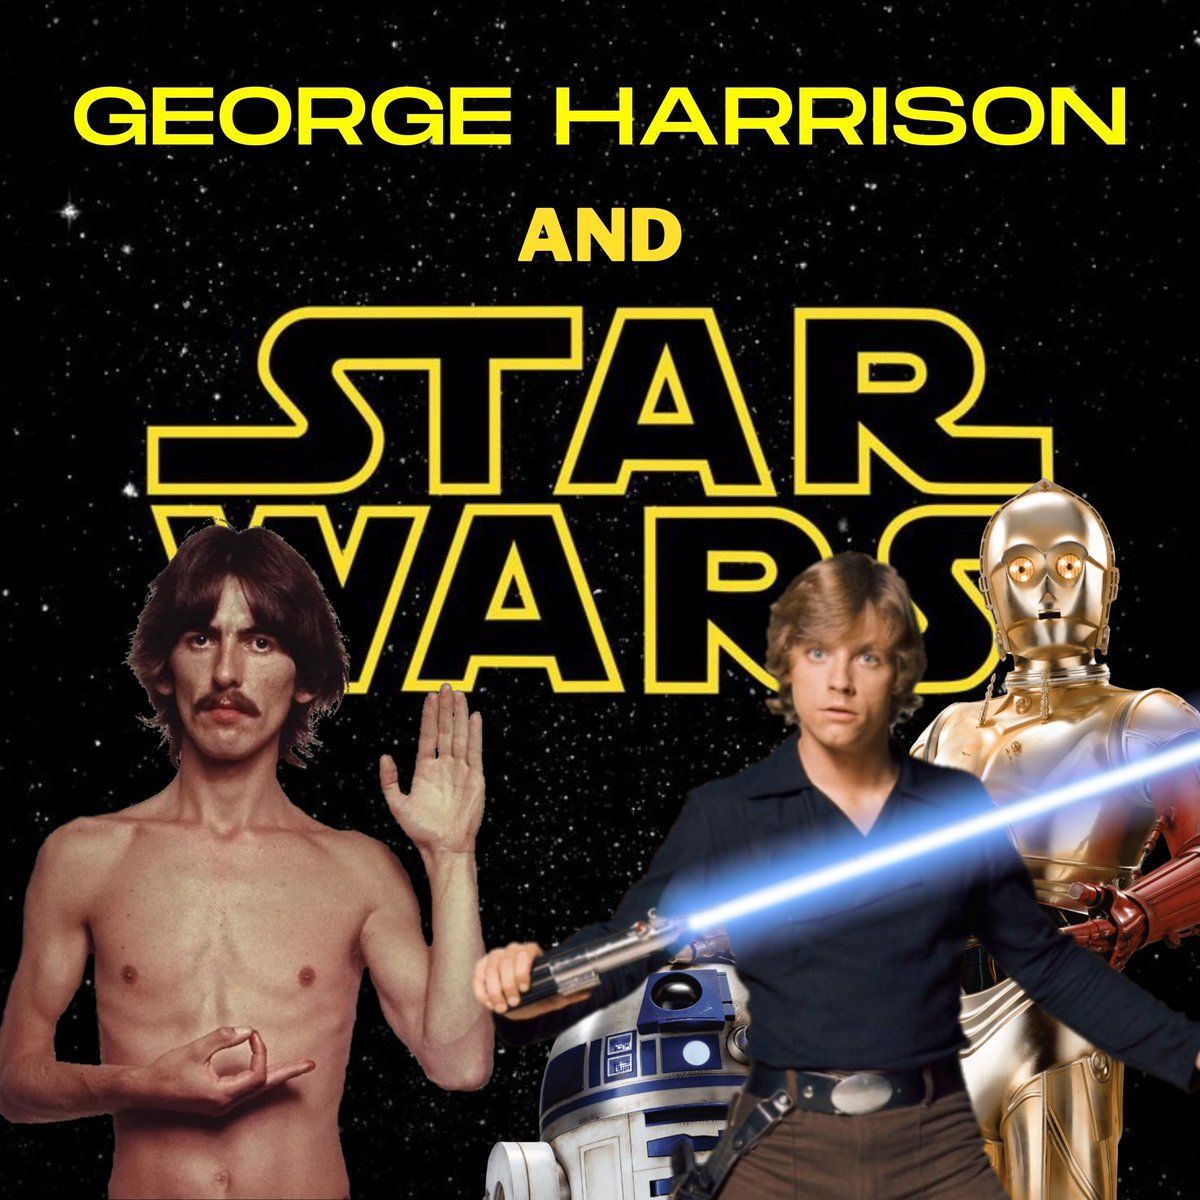 Did you know that George Harrison loved Star Wars? Here are 6 connections between George Harrison and the classic movie series that you may not know: